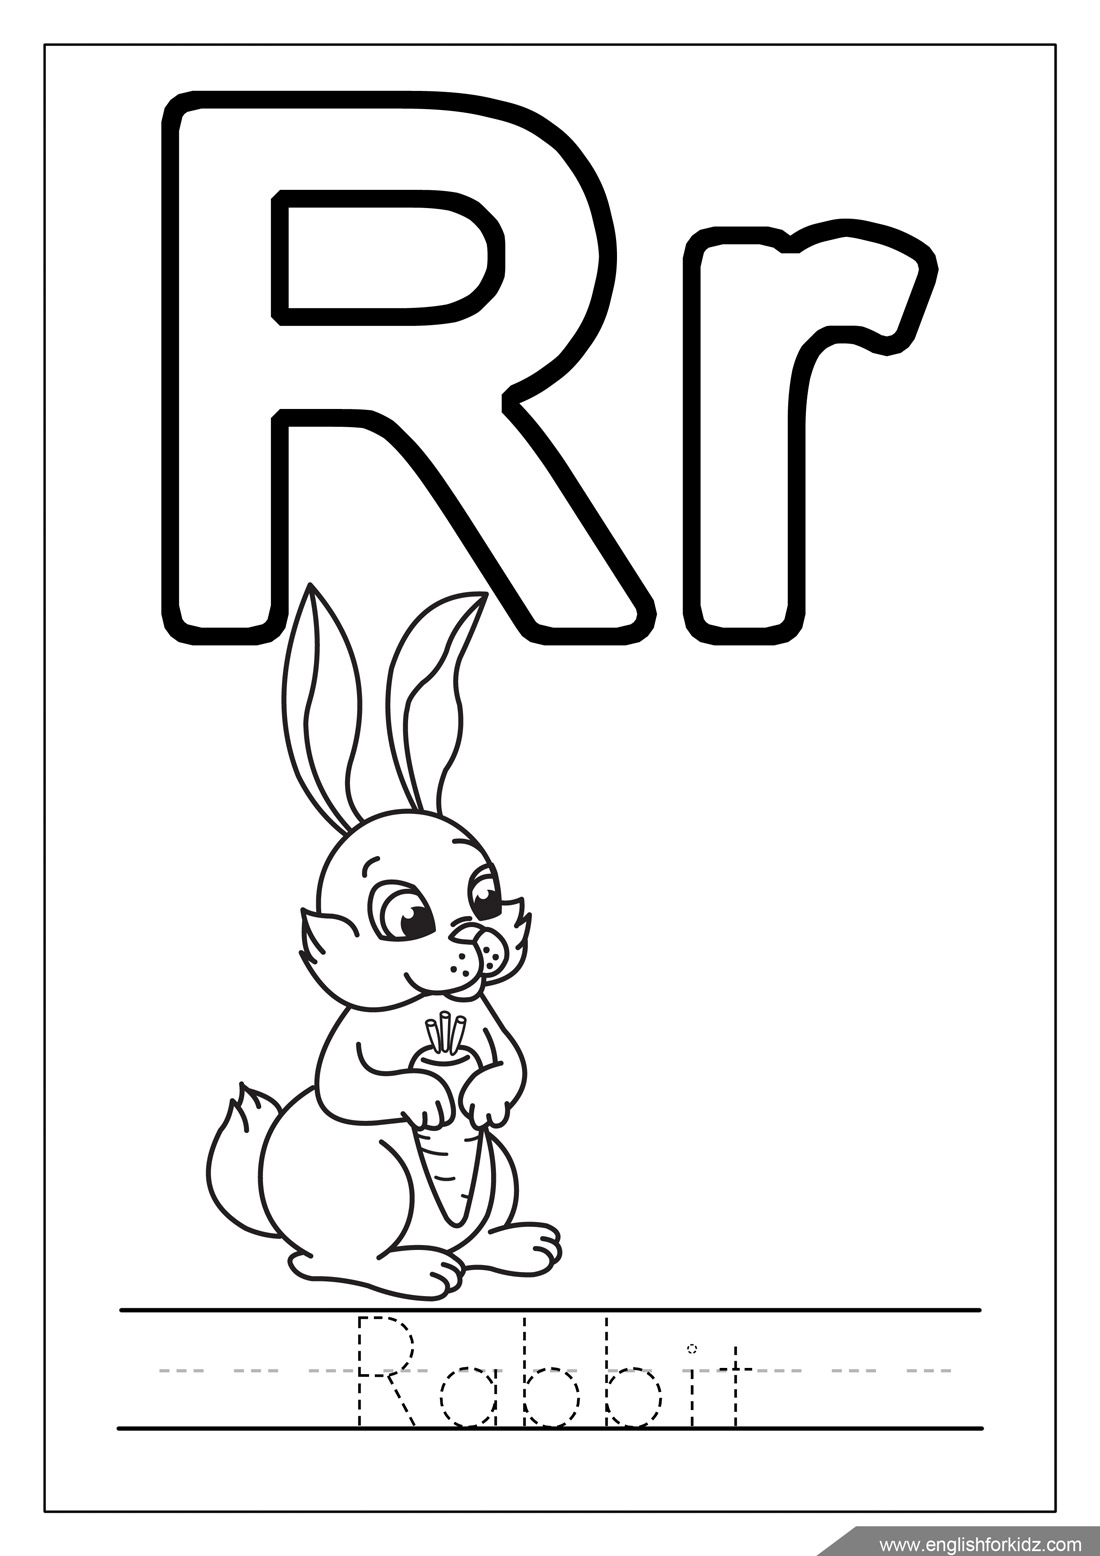 Alphabet Coloring Pages (Letters one one thousand - T)